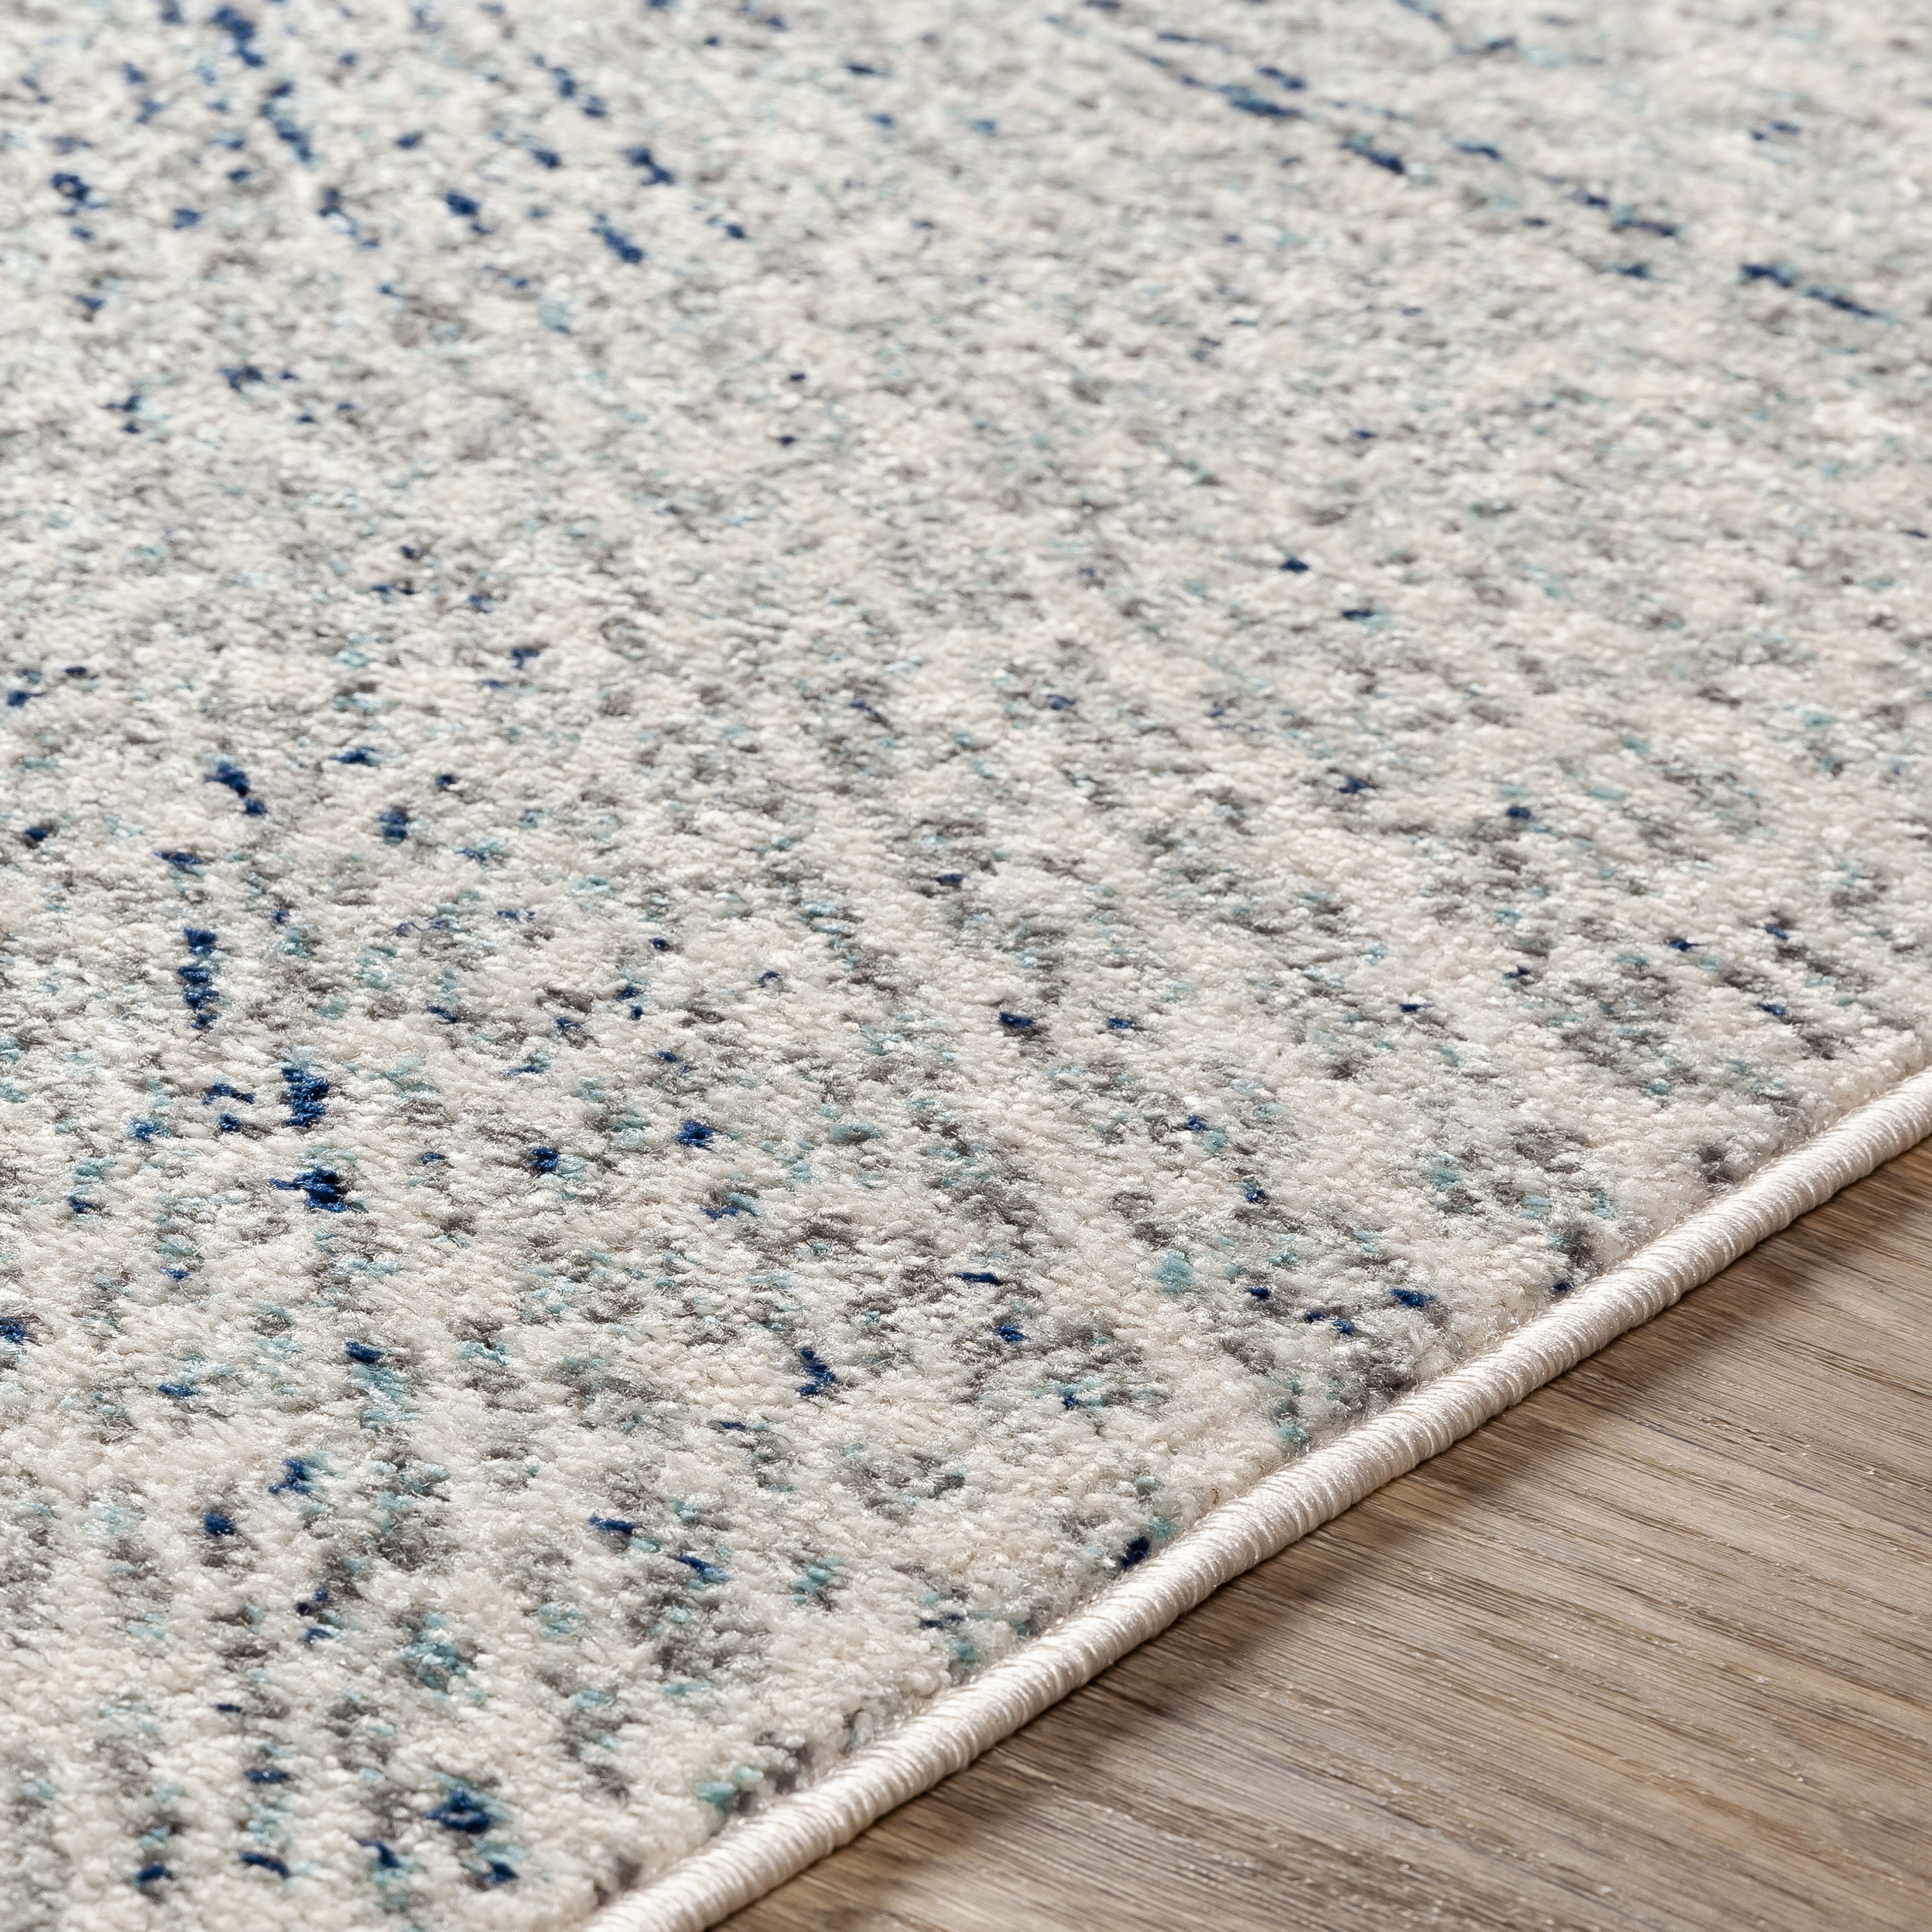 Chester Rug, 7'10" x 10'3" - Image 3